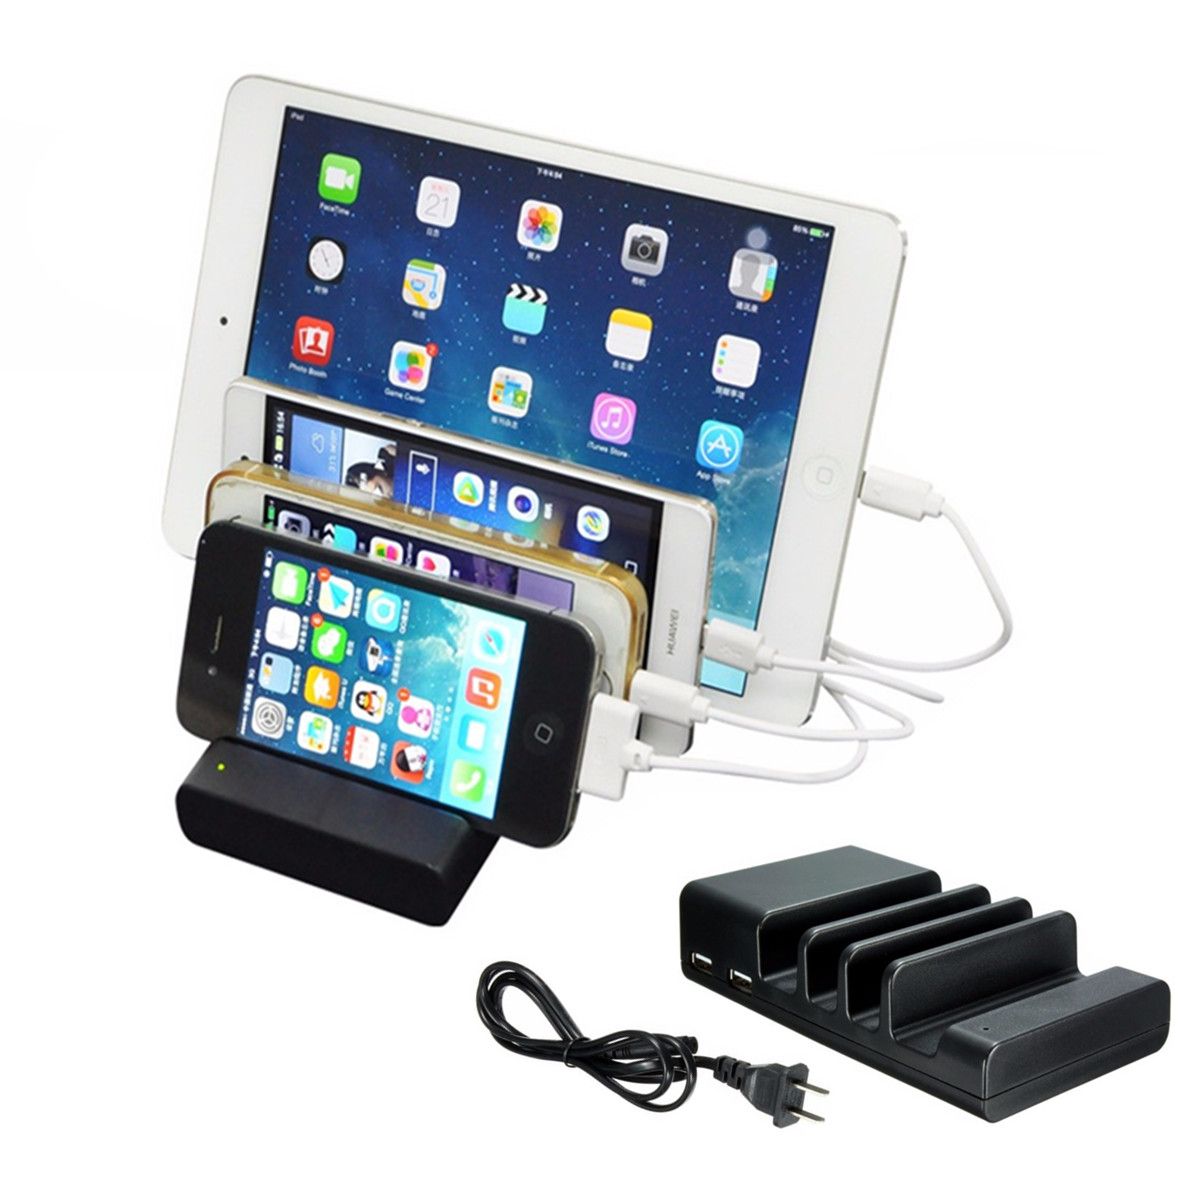 4-USB-Charging-Station-Charger-Dock-Universal-Charging-Station-Multi-function-Stand-Black-for-Tablet-1049894